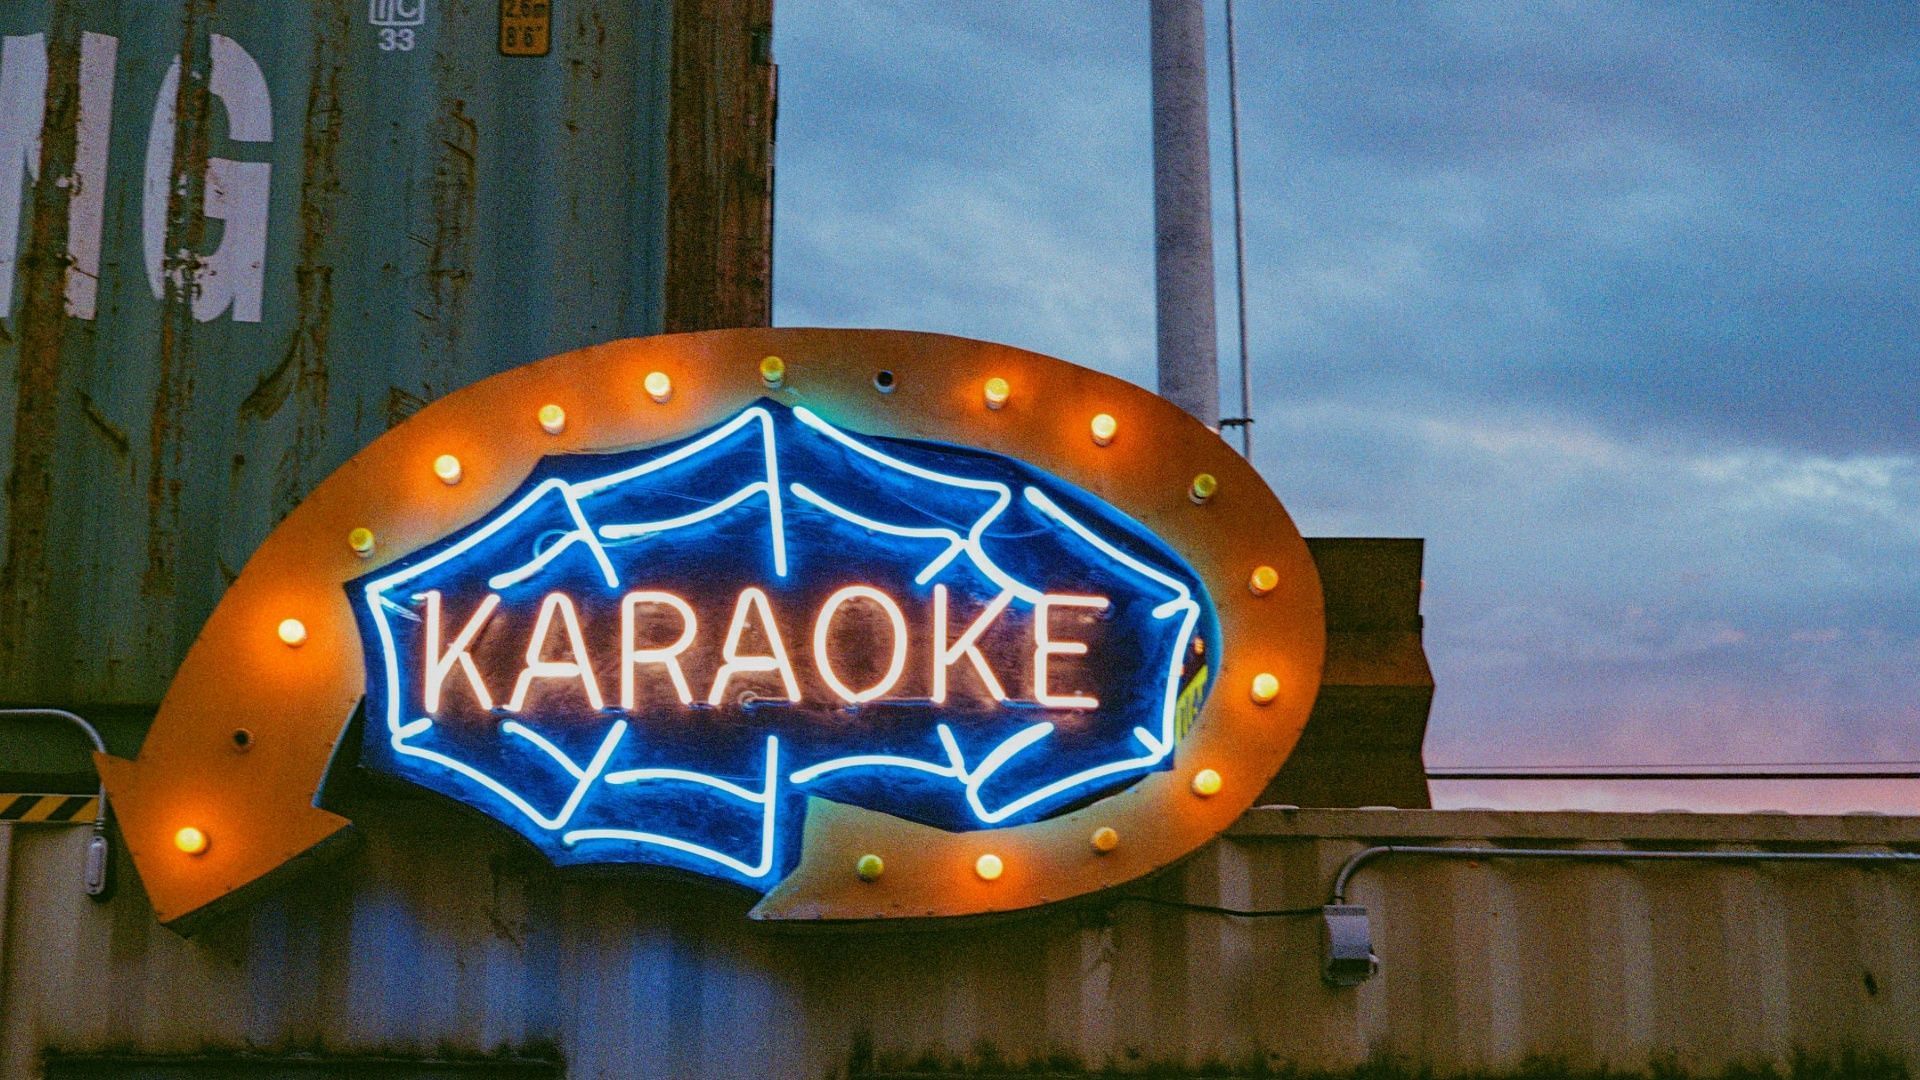 The inventor of the first ever Karaoke machine passed away in January (Photo by Nikola Đuza on Unsplash)